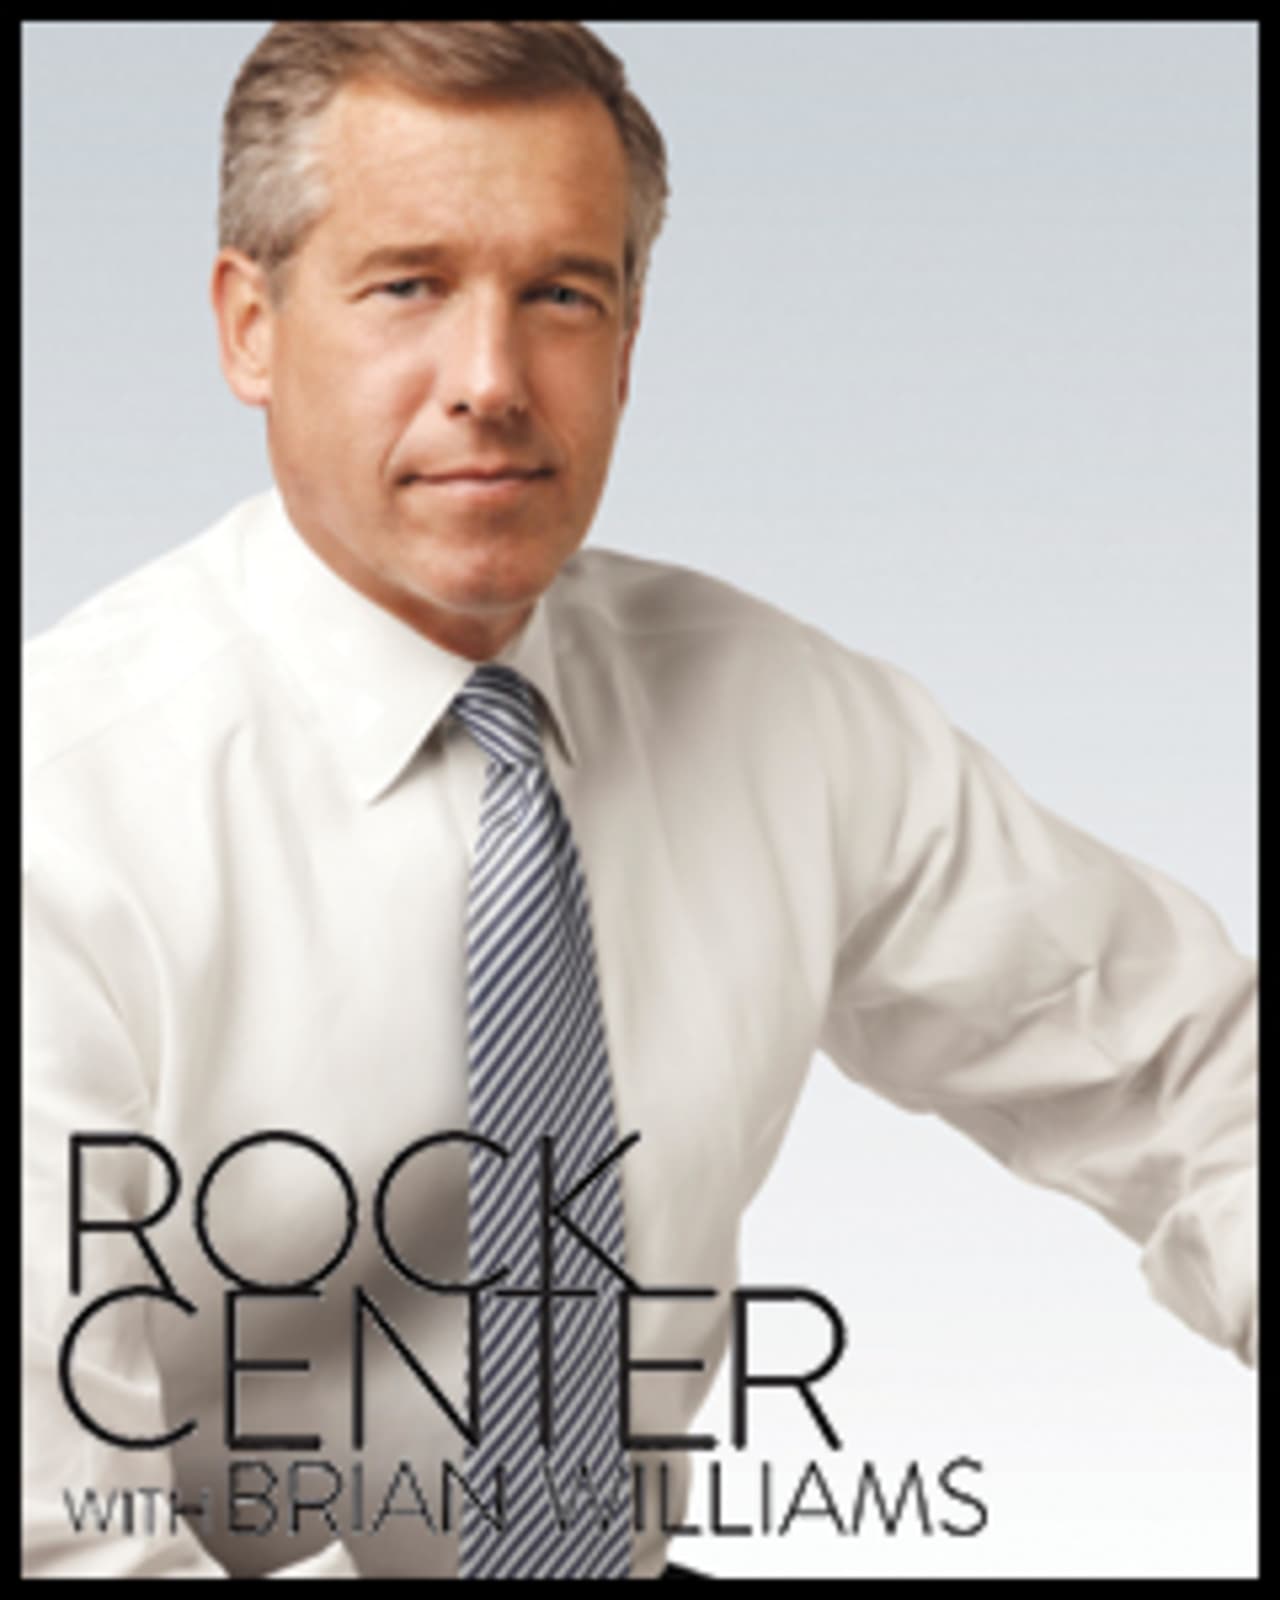 NBC has canceled the prime time news show "Rock Center With Brian Williams." 